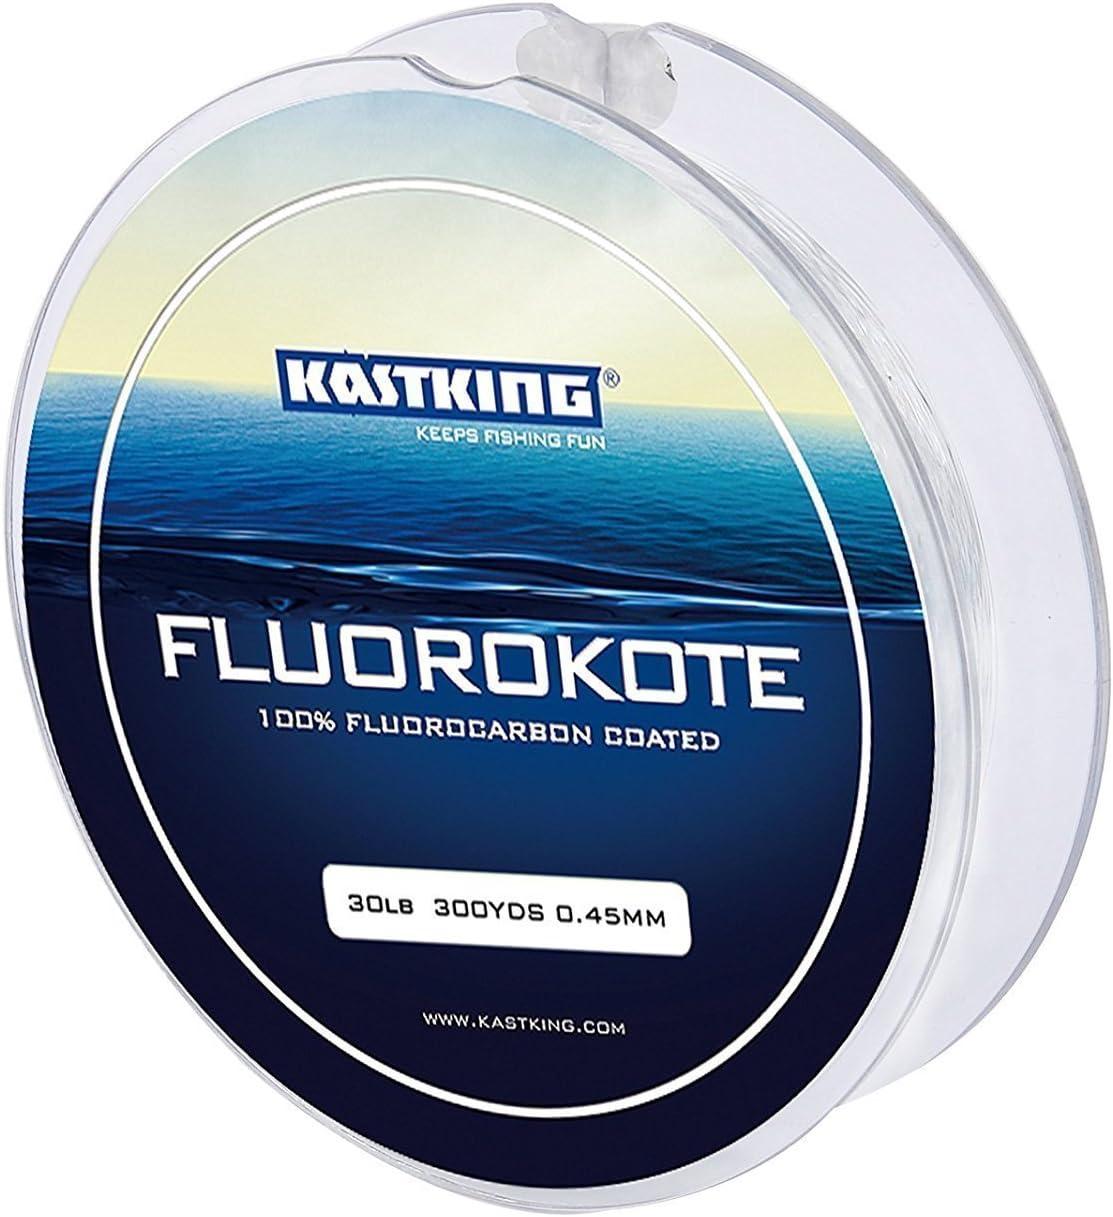 KastKing FluoroKote Fishing Line - 100% Pure Fluorocarbon Coated -  300Yds/274M 150Yds/137M Premium Spool - Upgrade from Mono Perfect  Substitute Solid Fluorocarbon Line 4LB(1.81KG) 0.18mm-300Yard